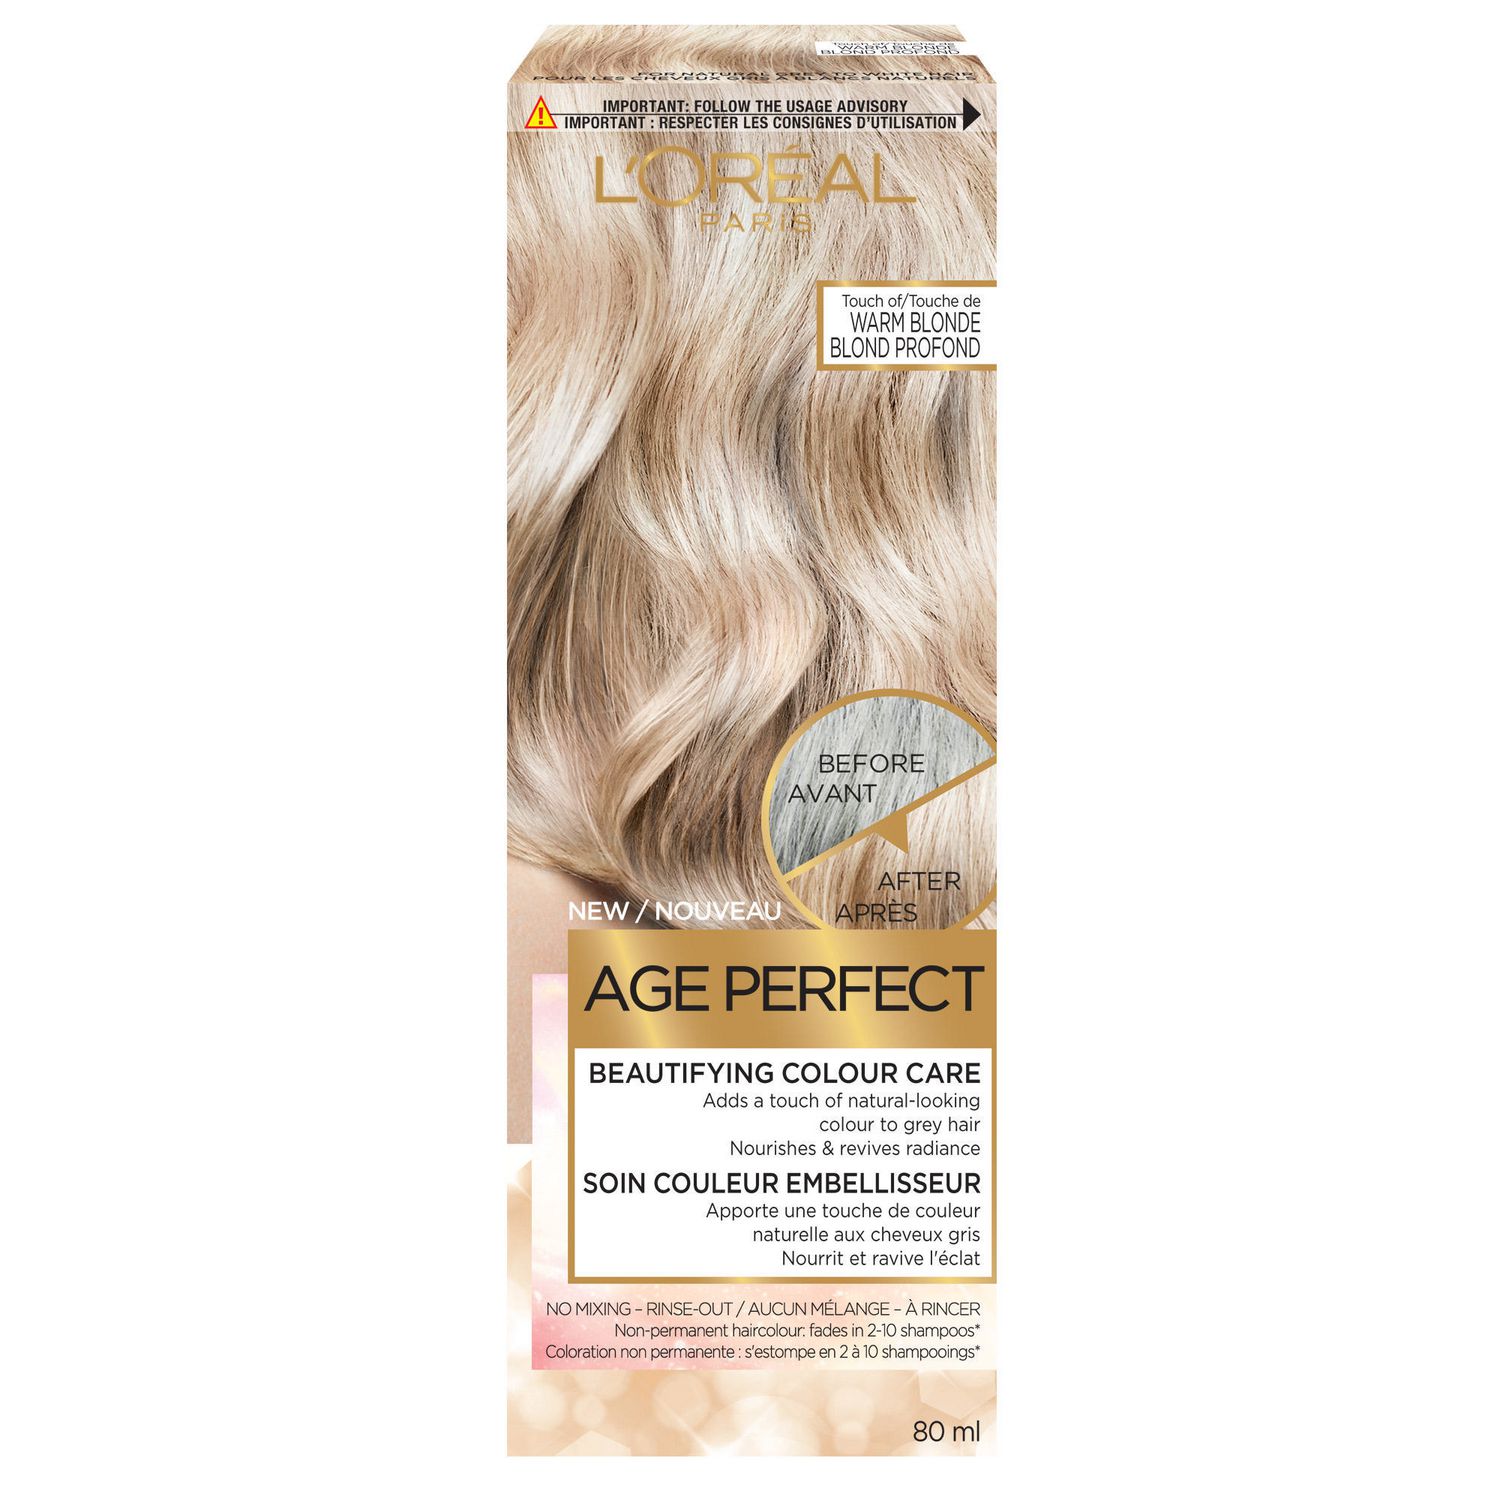 L'Oreal Paris Age Perfect Beautifying Colour Care Temporary Hair Colour ...